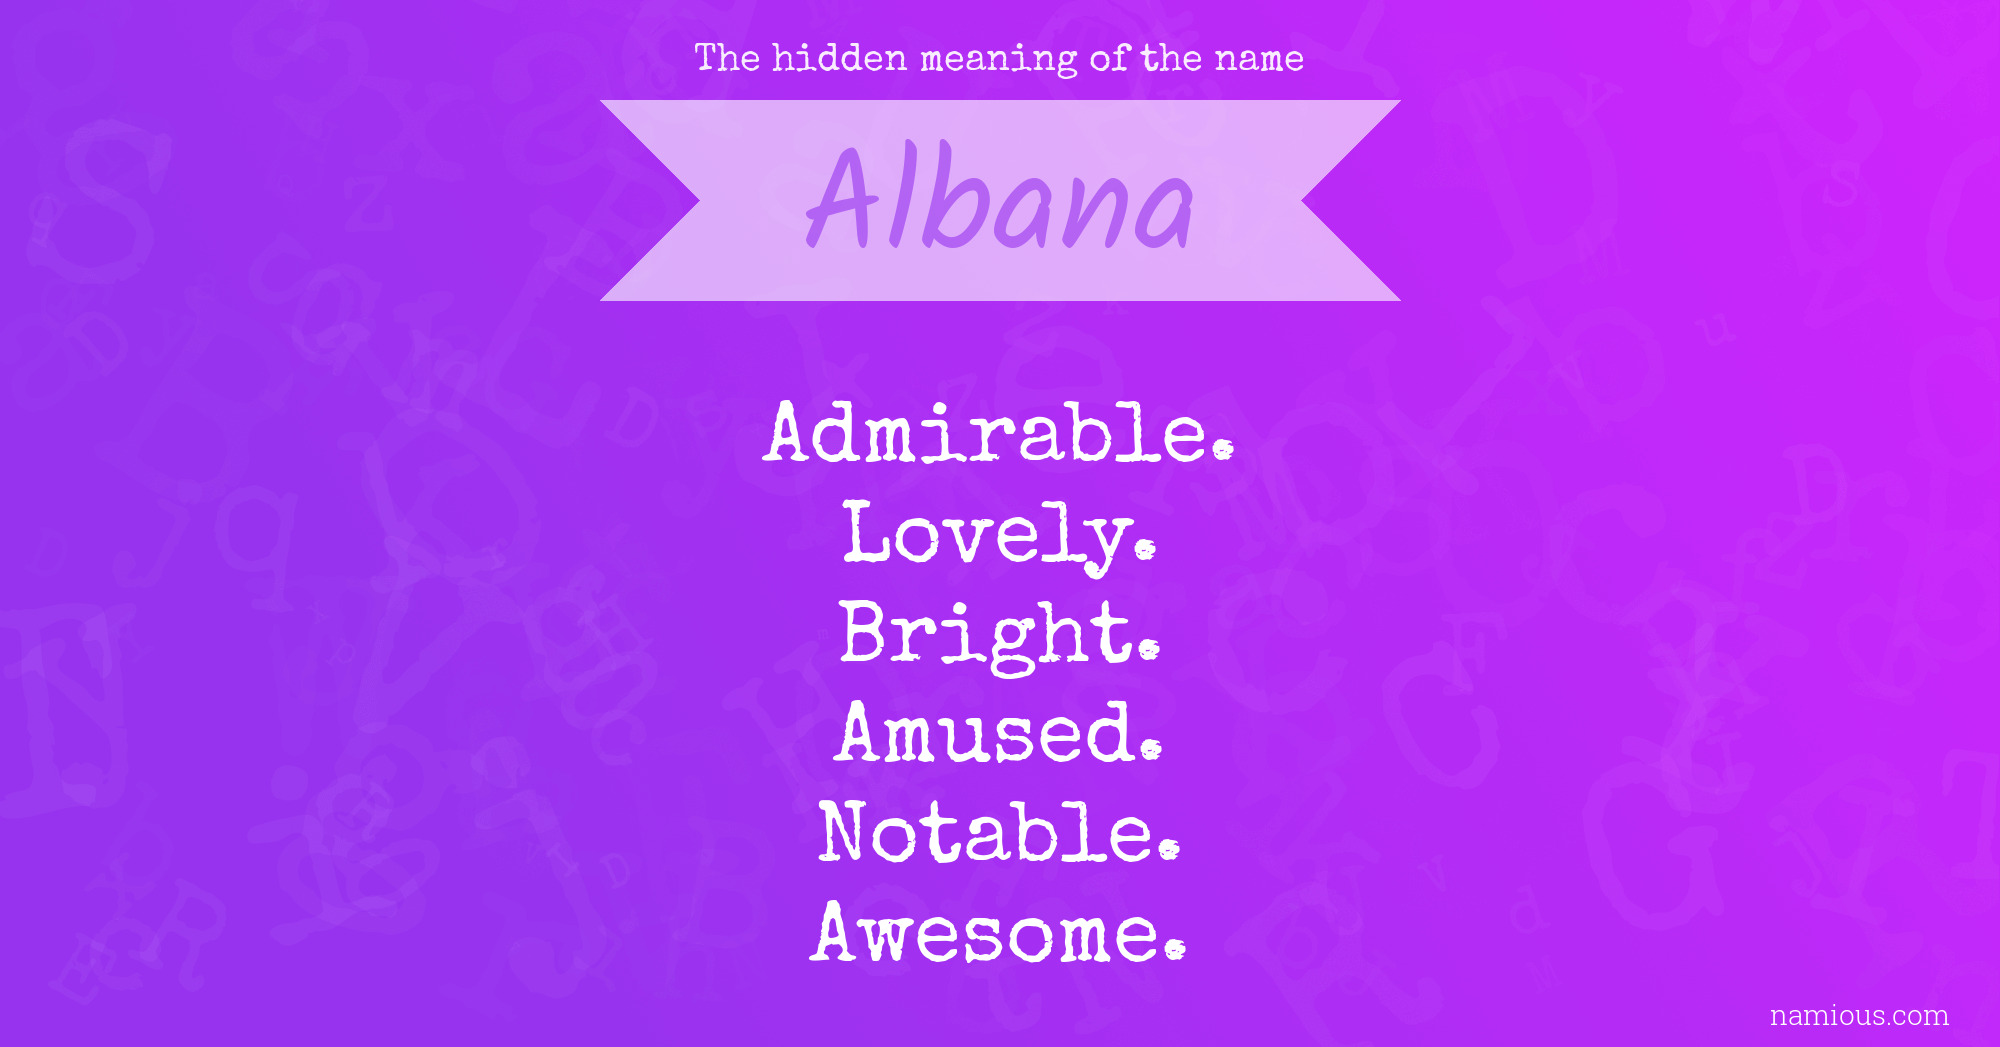 The hidden meaning of the name Albana